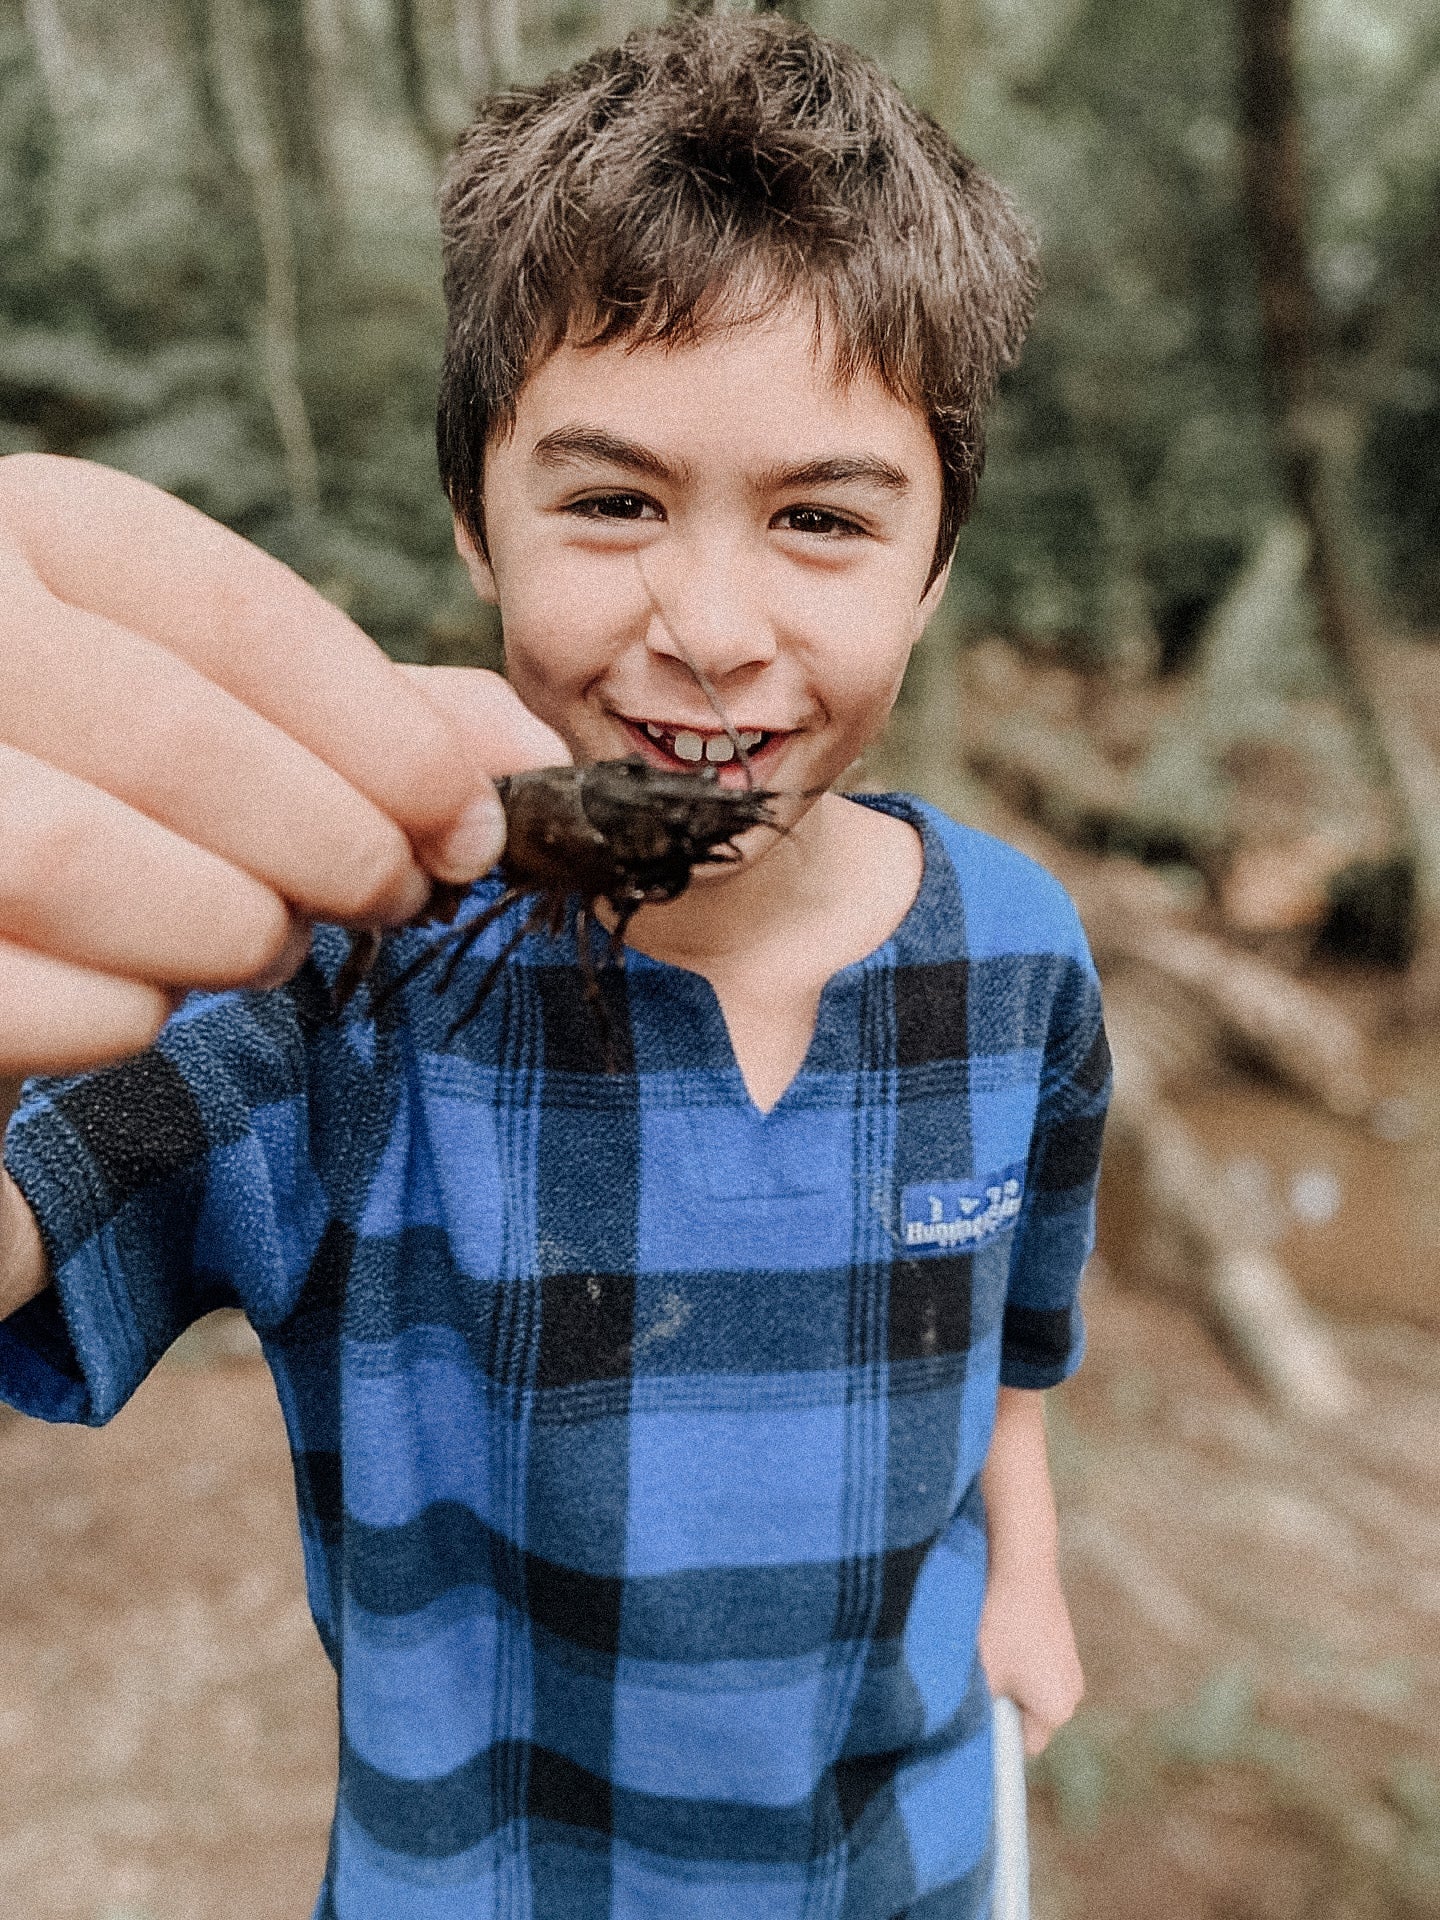 Why We Love Nature School